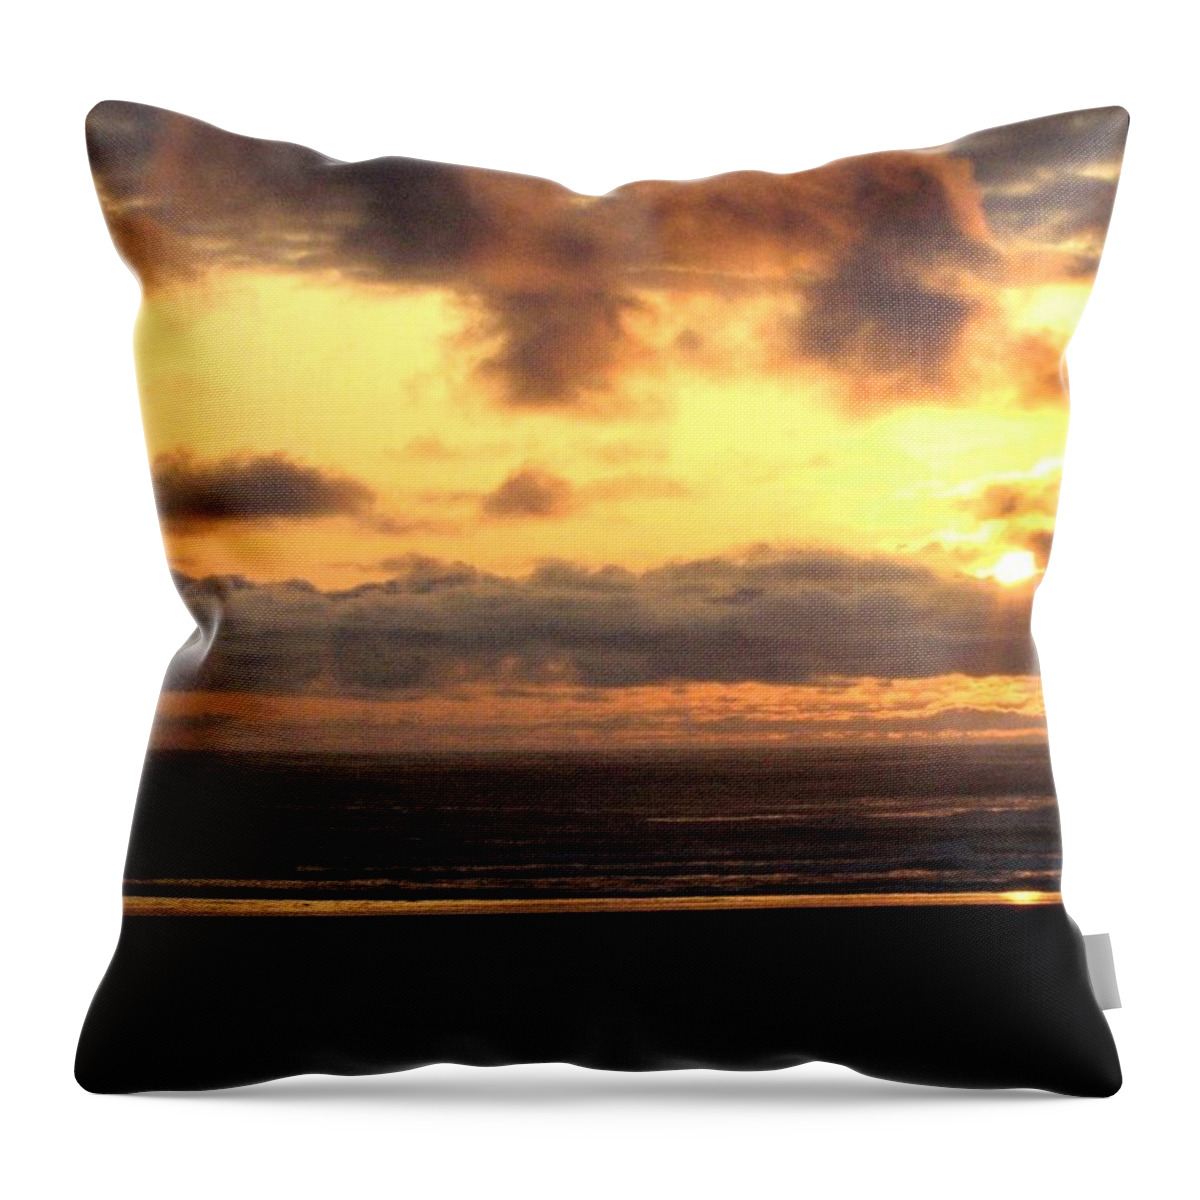 Sunset Throw Pillow featuring the photograph Flying Dog Sunset by Will Borden